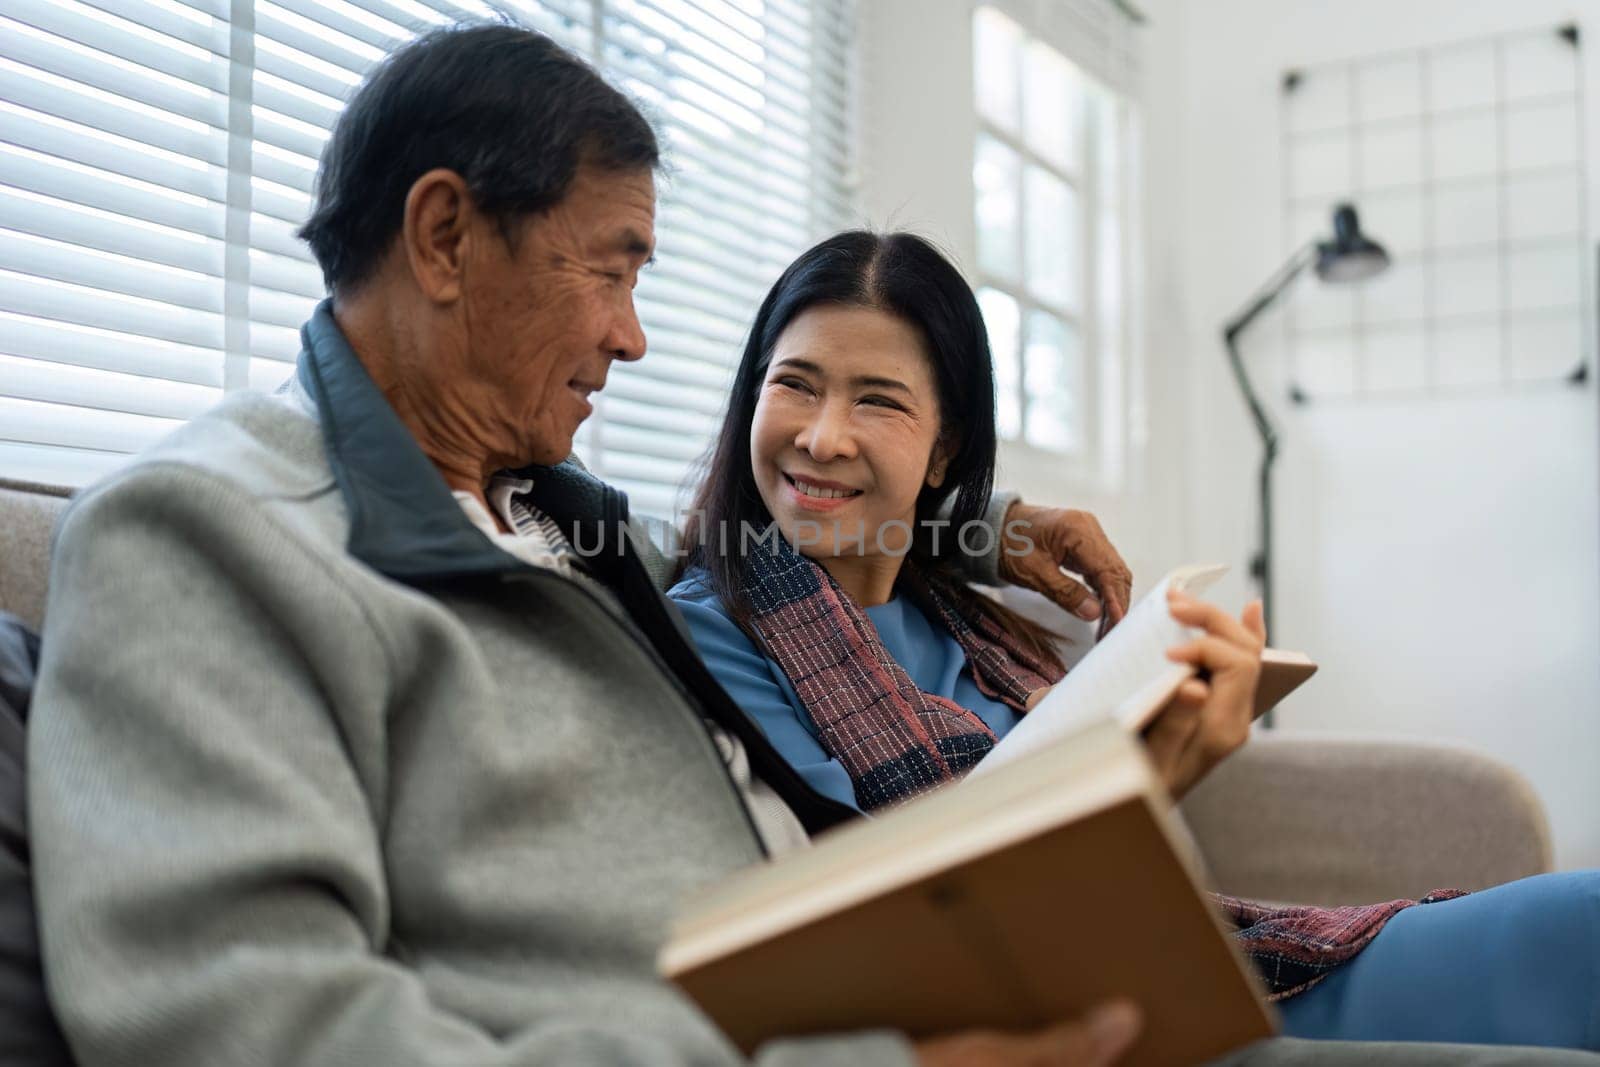 Retired elderly couple sits on couch in their home reading relaxing book. Senior Activity Concept by itchaznong